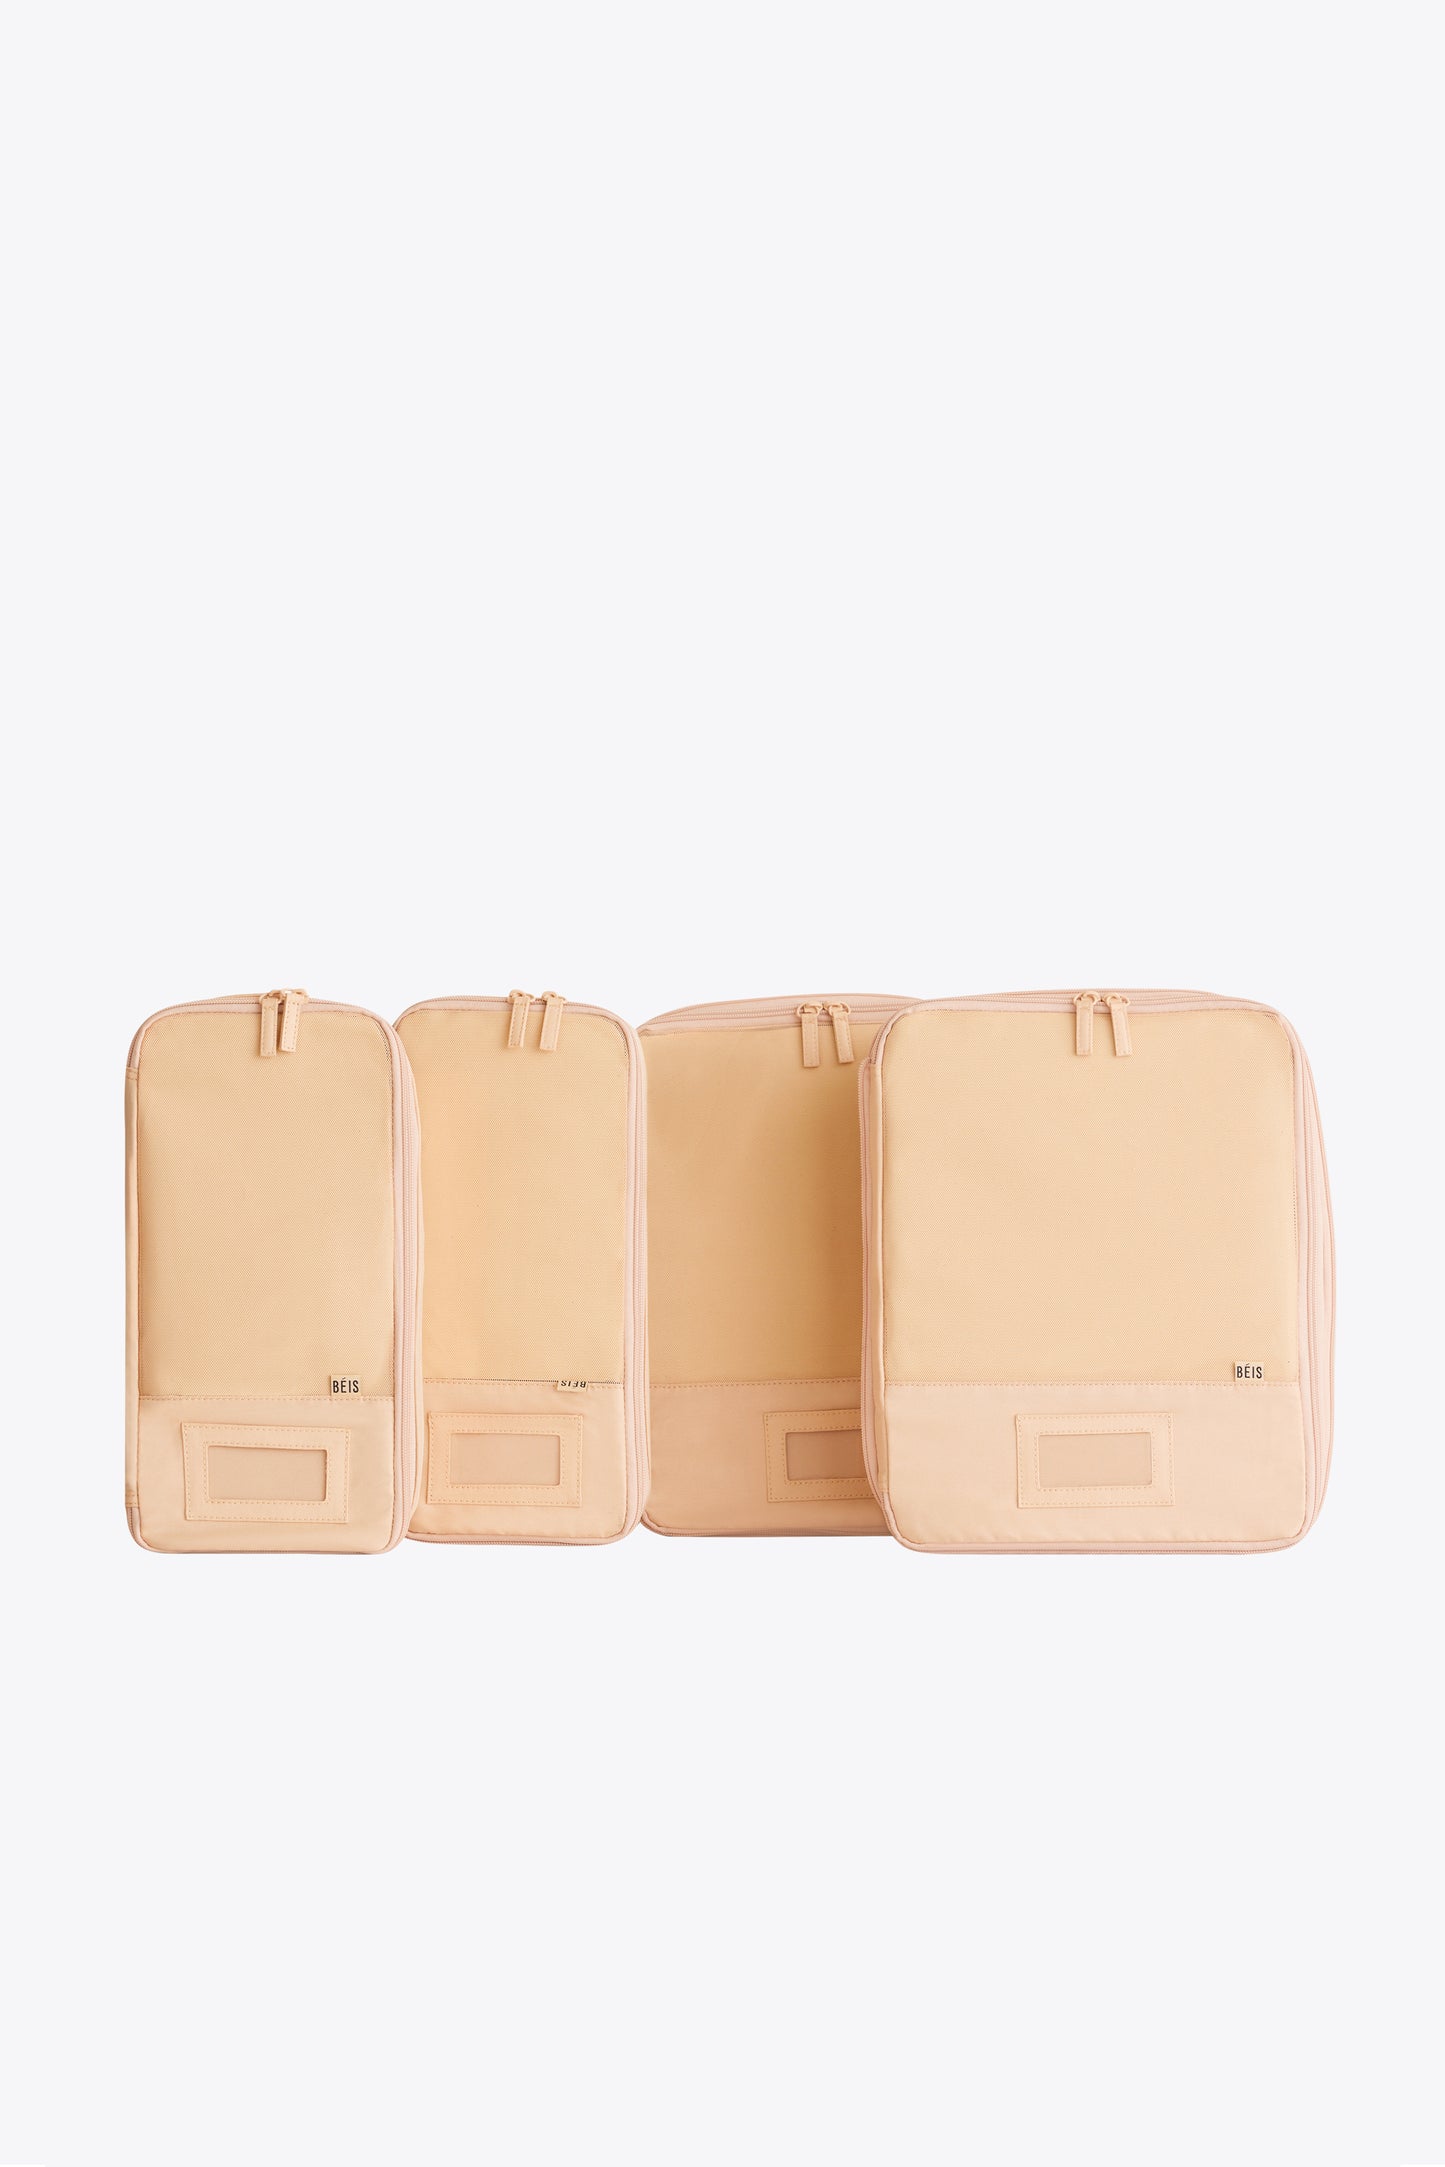 The Compression Packing Cubes 4 pc in Beige